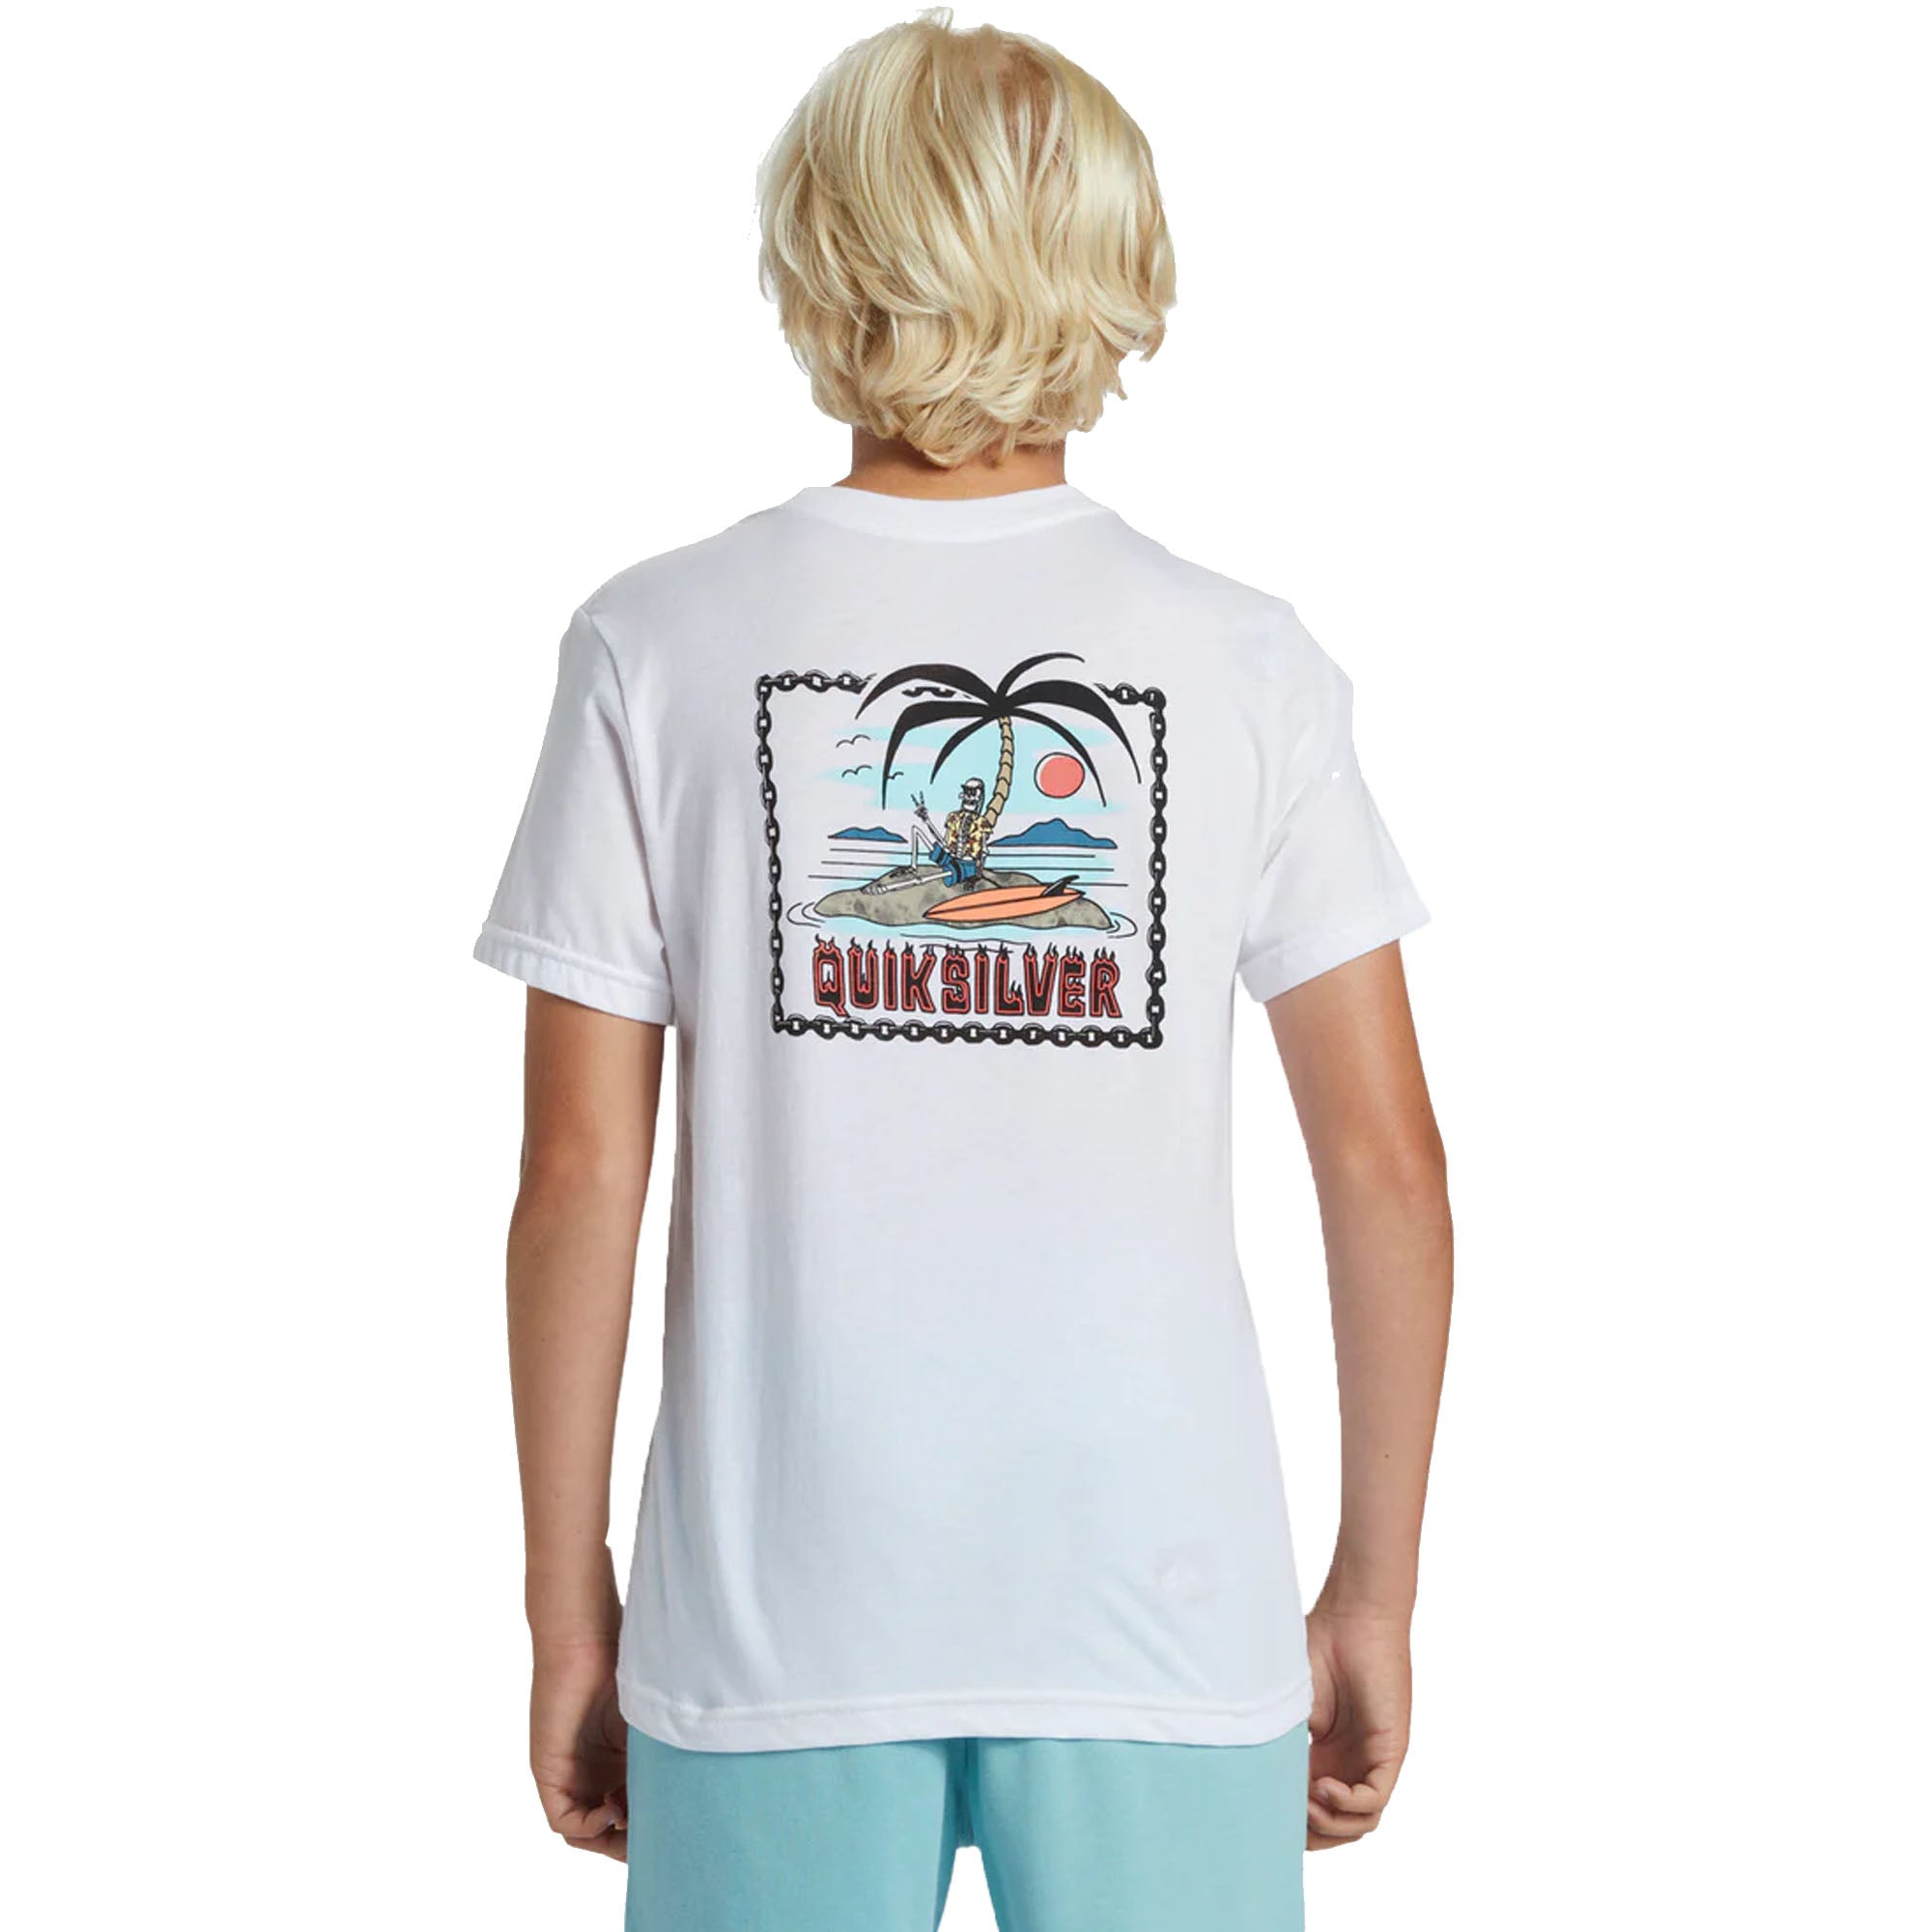 Quiksilver Marooned Youth Boys S/S T-Shirt